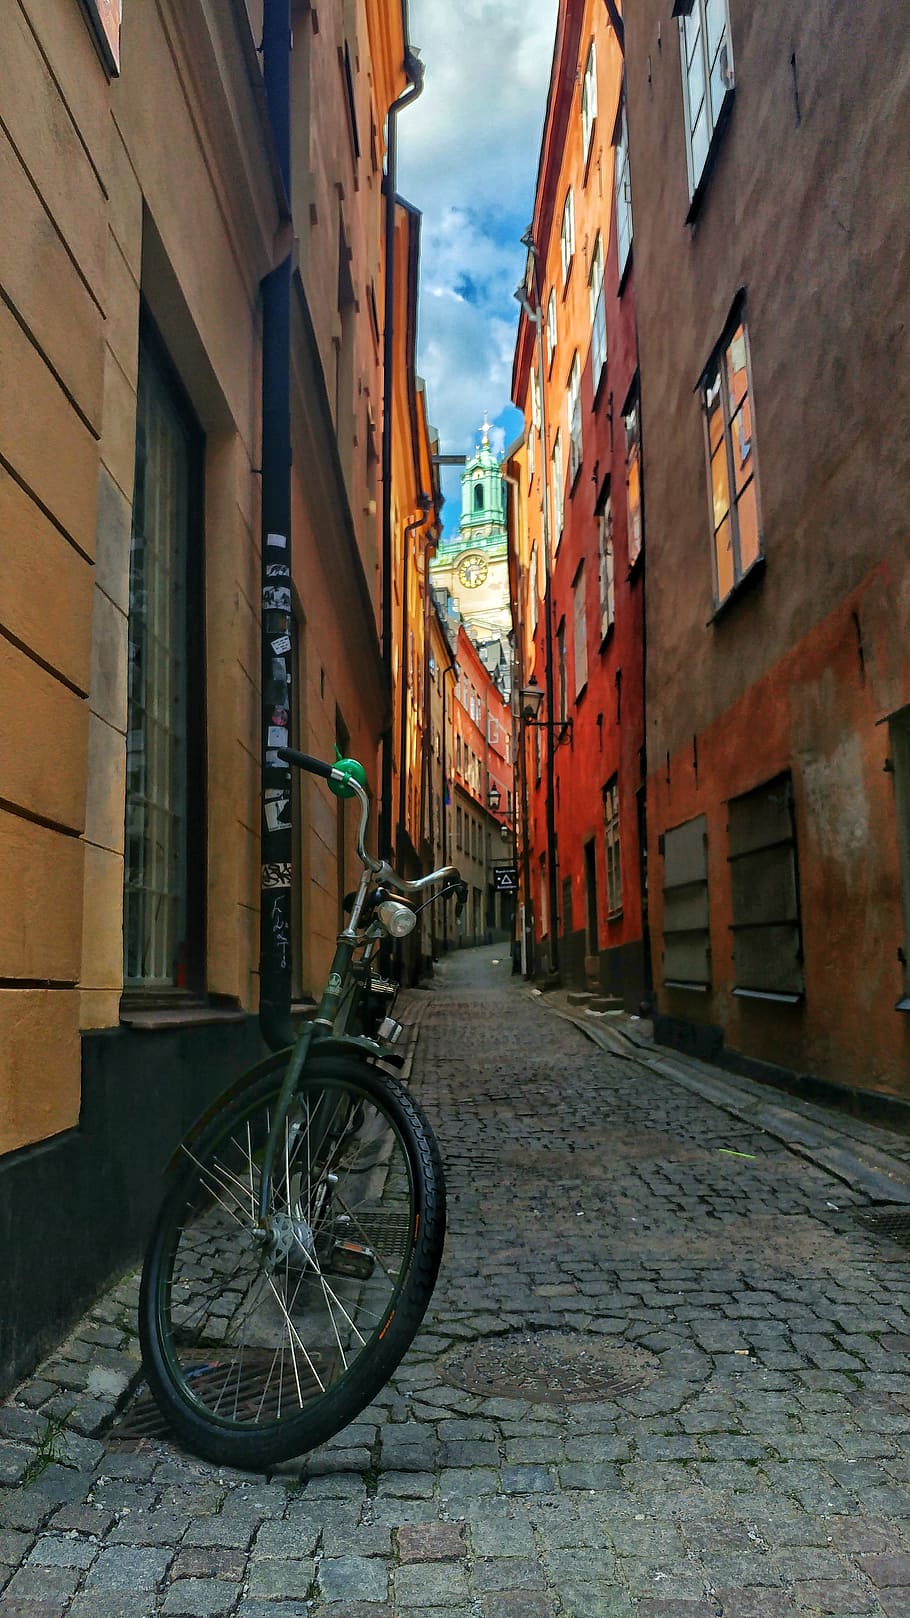 Stockholm, Gamla Stan, Colour, bicicle, alley, architecture, travel, sweden, building exterior, bicycle